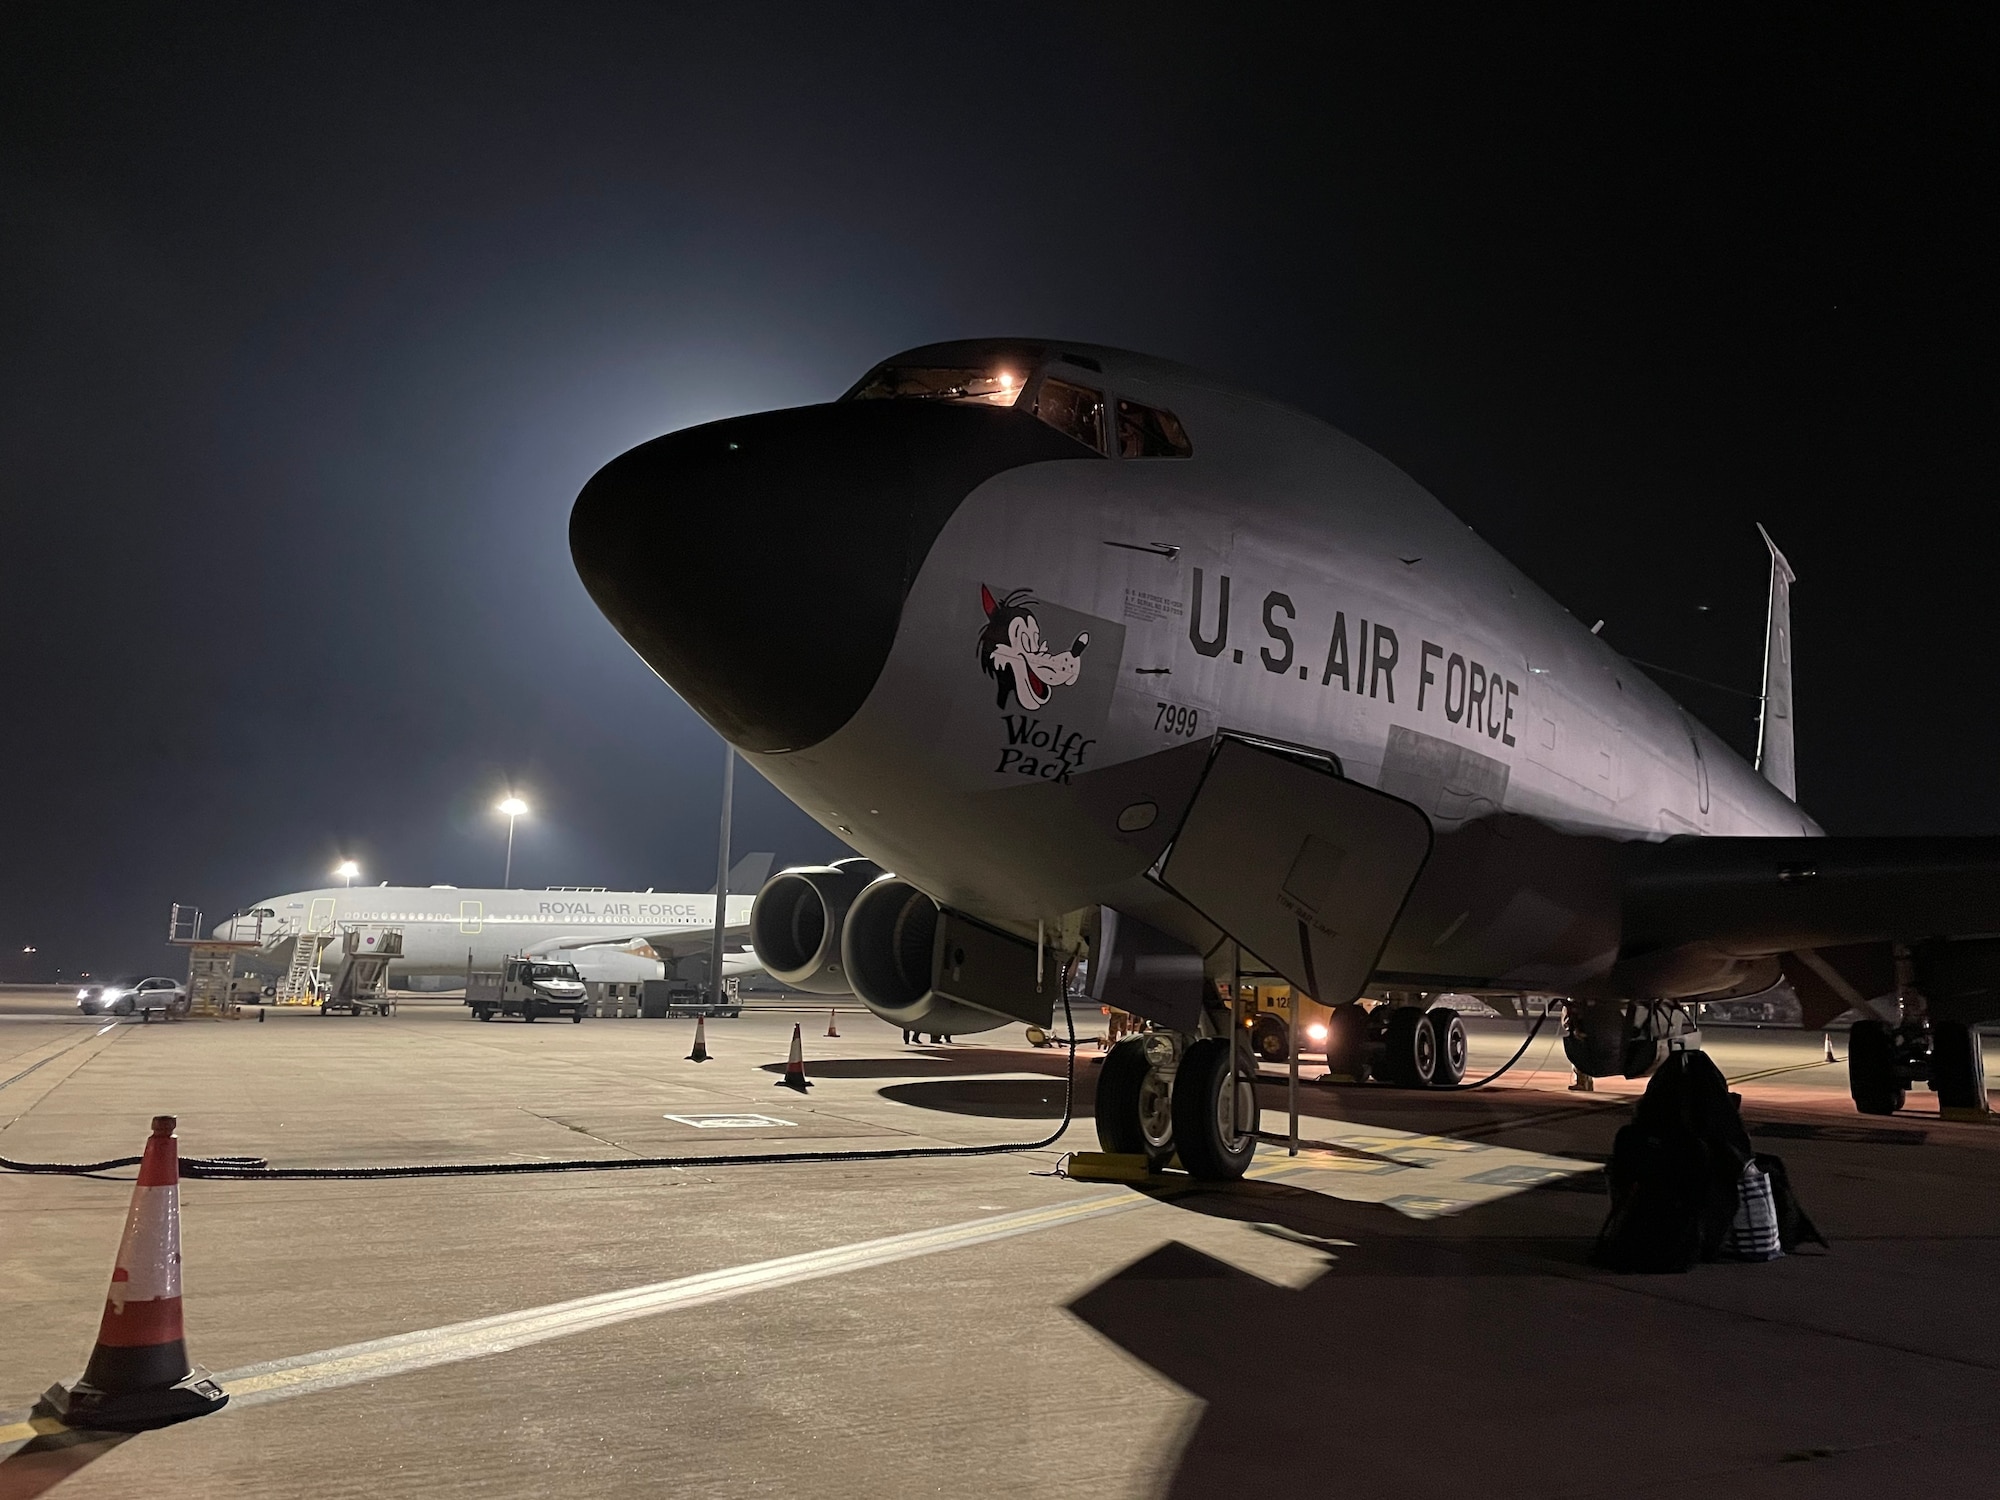 A U.S. Air Force KC-135 Stratotanker aircraft assigned to the 100th Air Refueling Wing, Royal Air Force Mildenhall, England, sits on the flightline during exercise Castle Forge at RAF Brize Norton, England, Nov. 2, 2021. Exercising elements of Agile Combat Employment enables U.S. forces in Europe to operate from locations with varying levels of capacity and support, ensuring Airmen and aircrews are postured to deliver lethal combat power across the spectrum of military operations. In addition to F-15 Eagle aircraft operations in the Black Sea Region, Castle Forge encompasses the USAFE-wide ACE capstone event. Castle Forge’s components will better enable forces to quickly disperse and continue to deliver air power from locations with varying levels of capacity and support, ensuring Airmen are always ready to respond to potential threats. (U.S. Air Force photo by Senior Airman Joseph Barron)